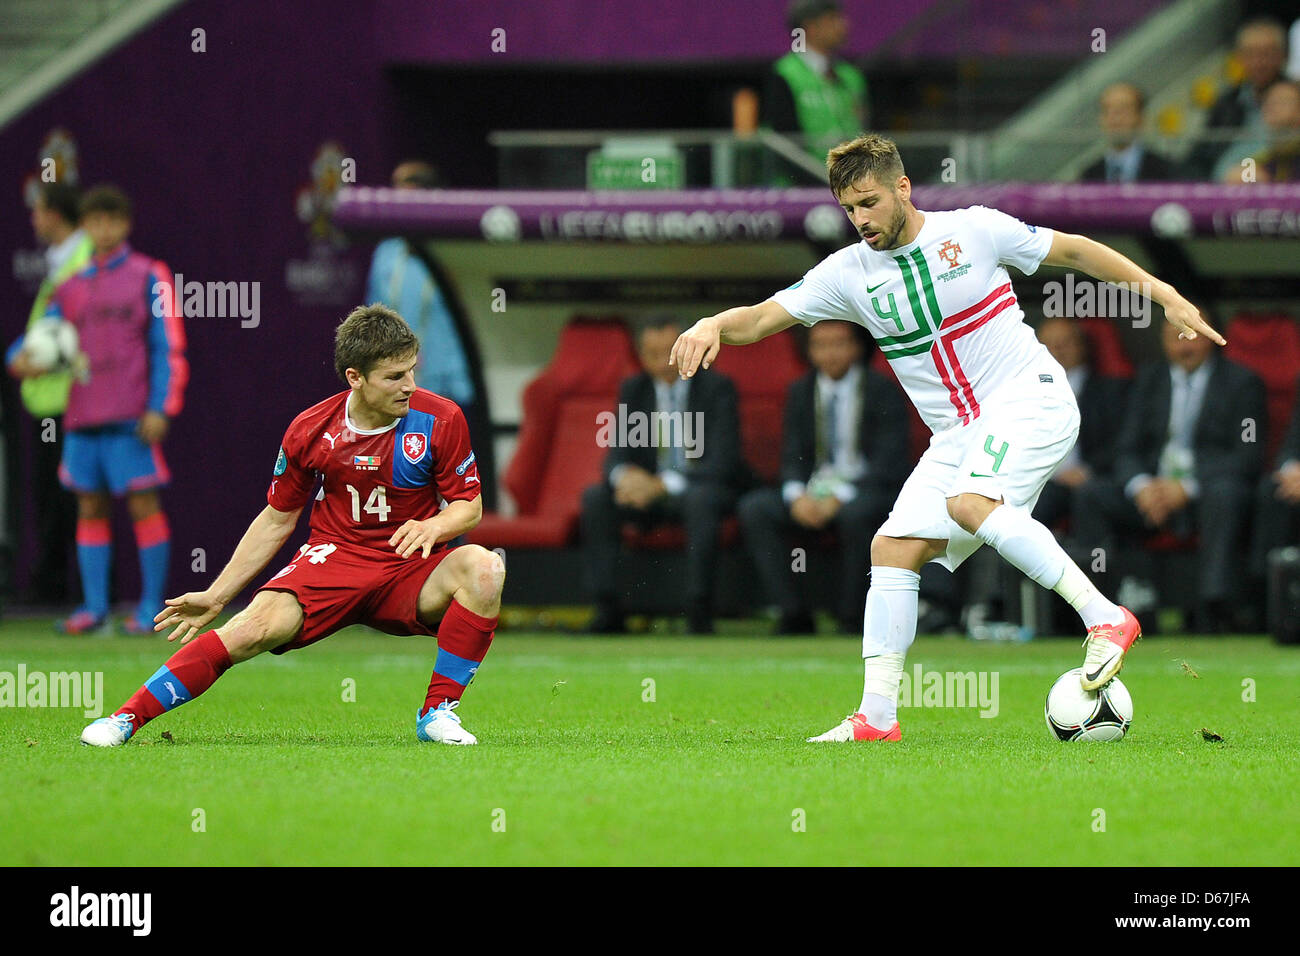 Czech Republic's Vaclav Pilar tackles Portugal's Miguel Veloso during a Euro 2012 quarter final match between the Czech Republic and Portugal in Warsaw, Portugal, 21 June 2012. Photo: Revierfoto Stock Photo